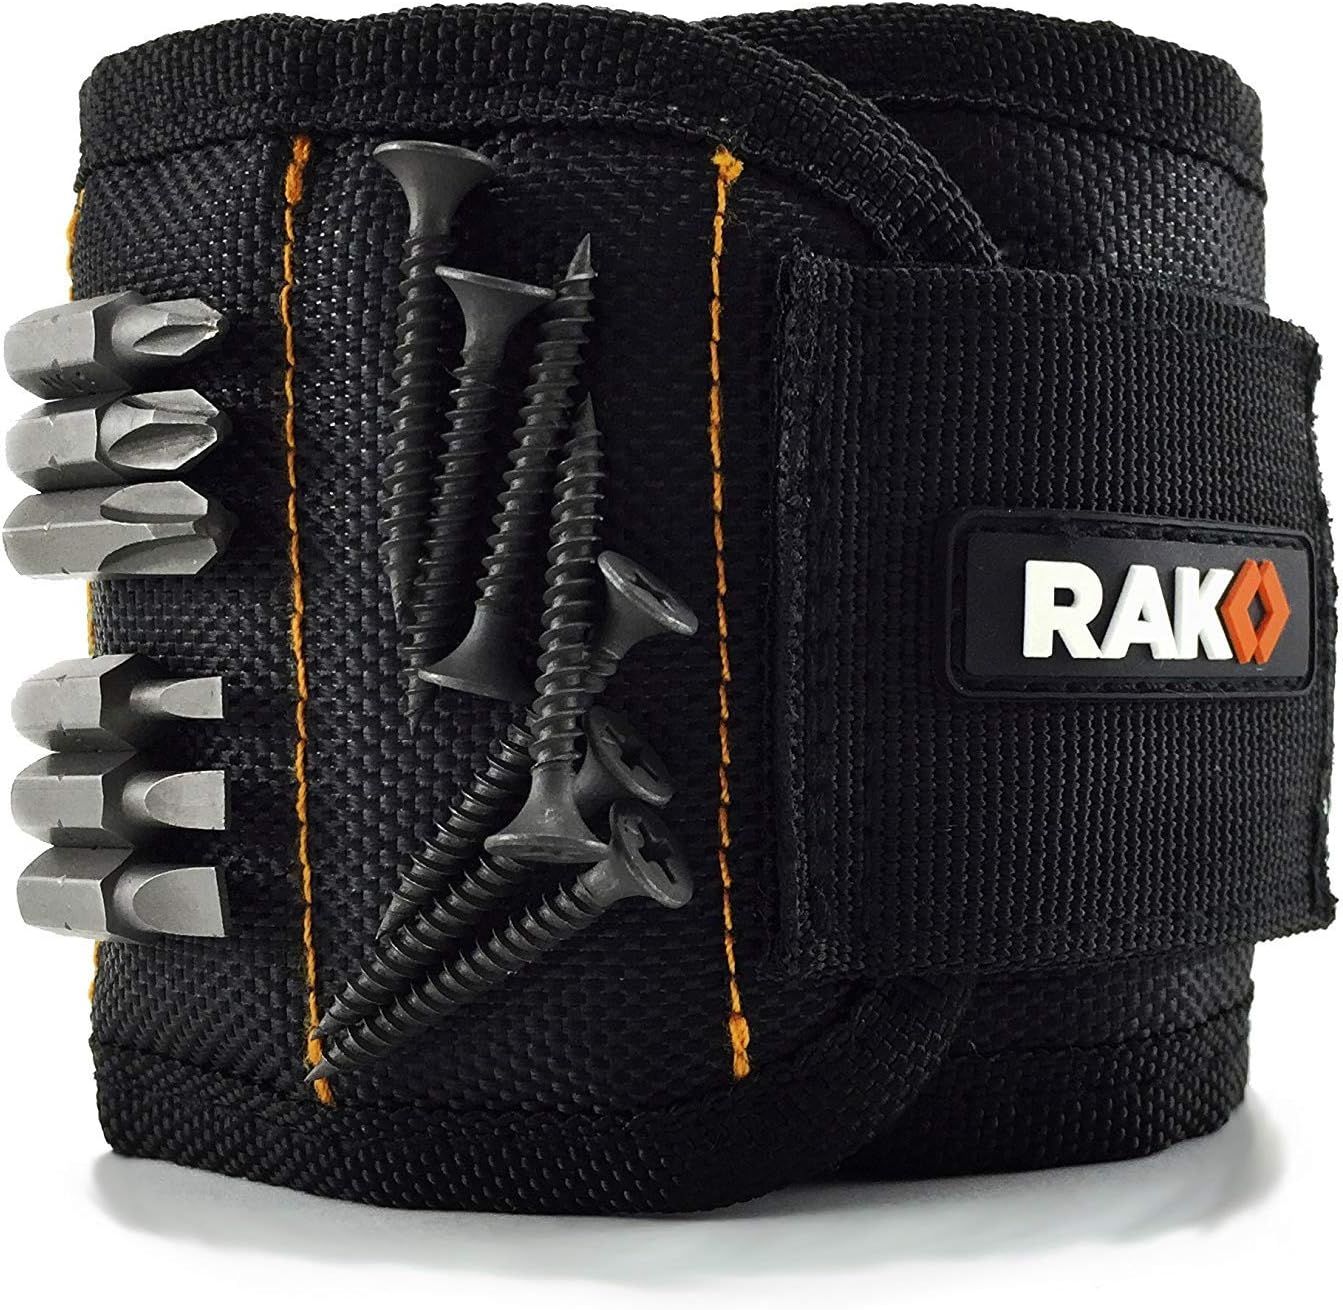 RAK Magnetic Wristband for Holding Screws, Nails and Drill Bits for Men - Made from Premium Balli... | Amazon (US)